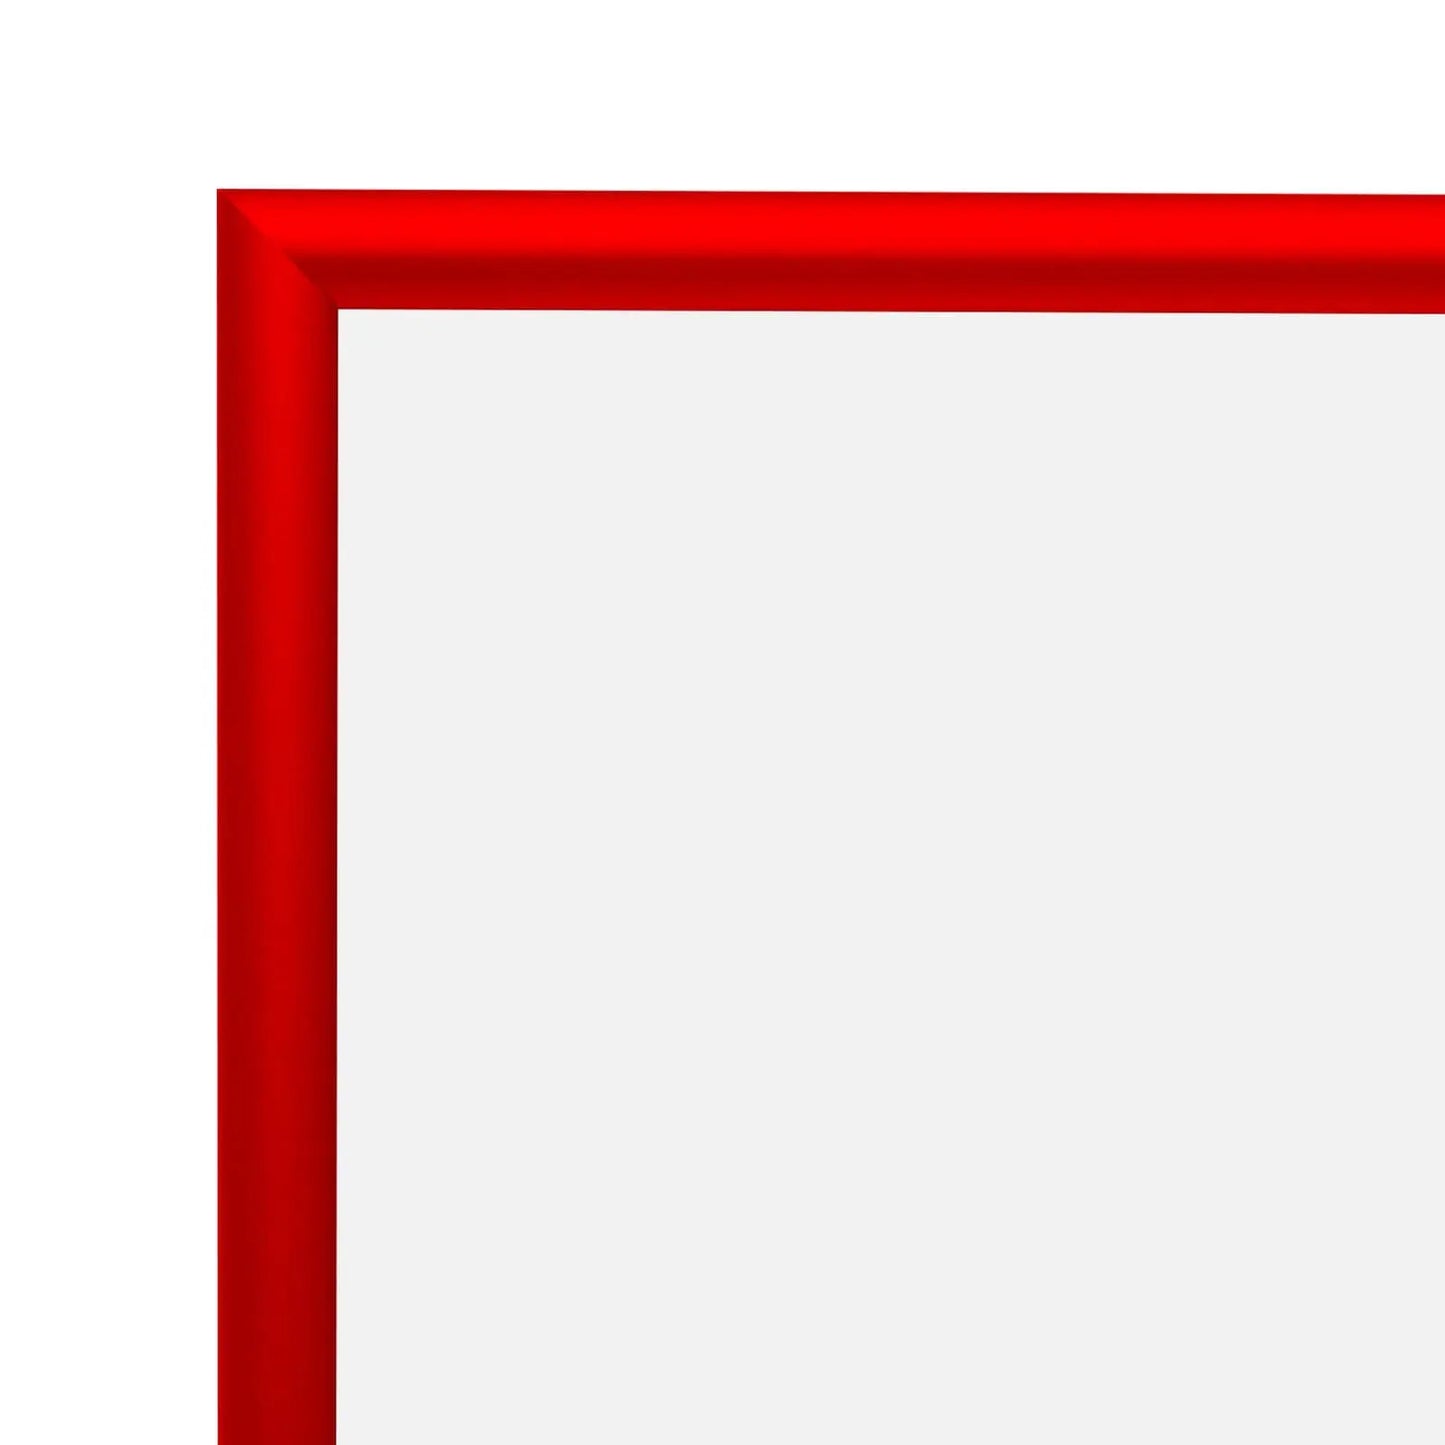 24x30 Red SnapeZo® Snap Frame - 1" Profile - Snap Frames Direct